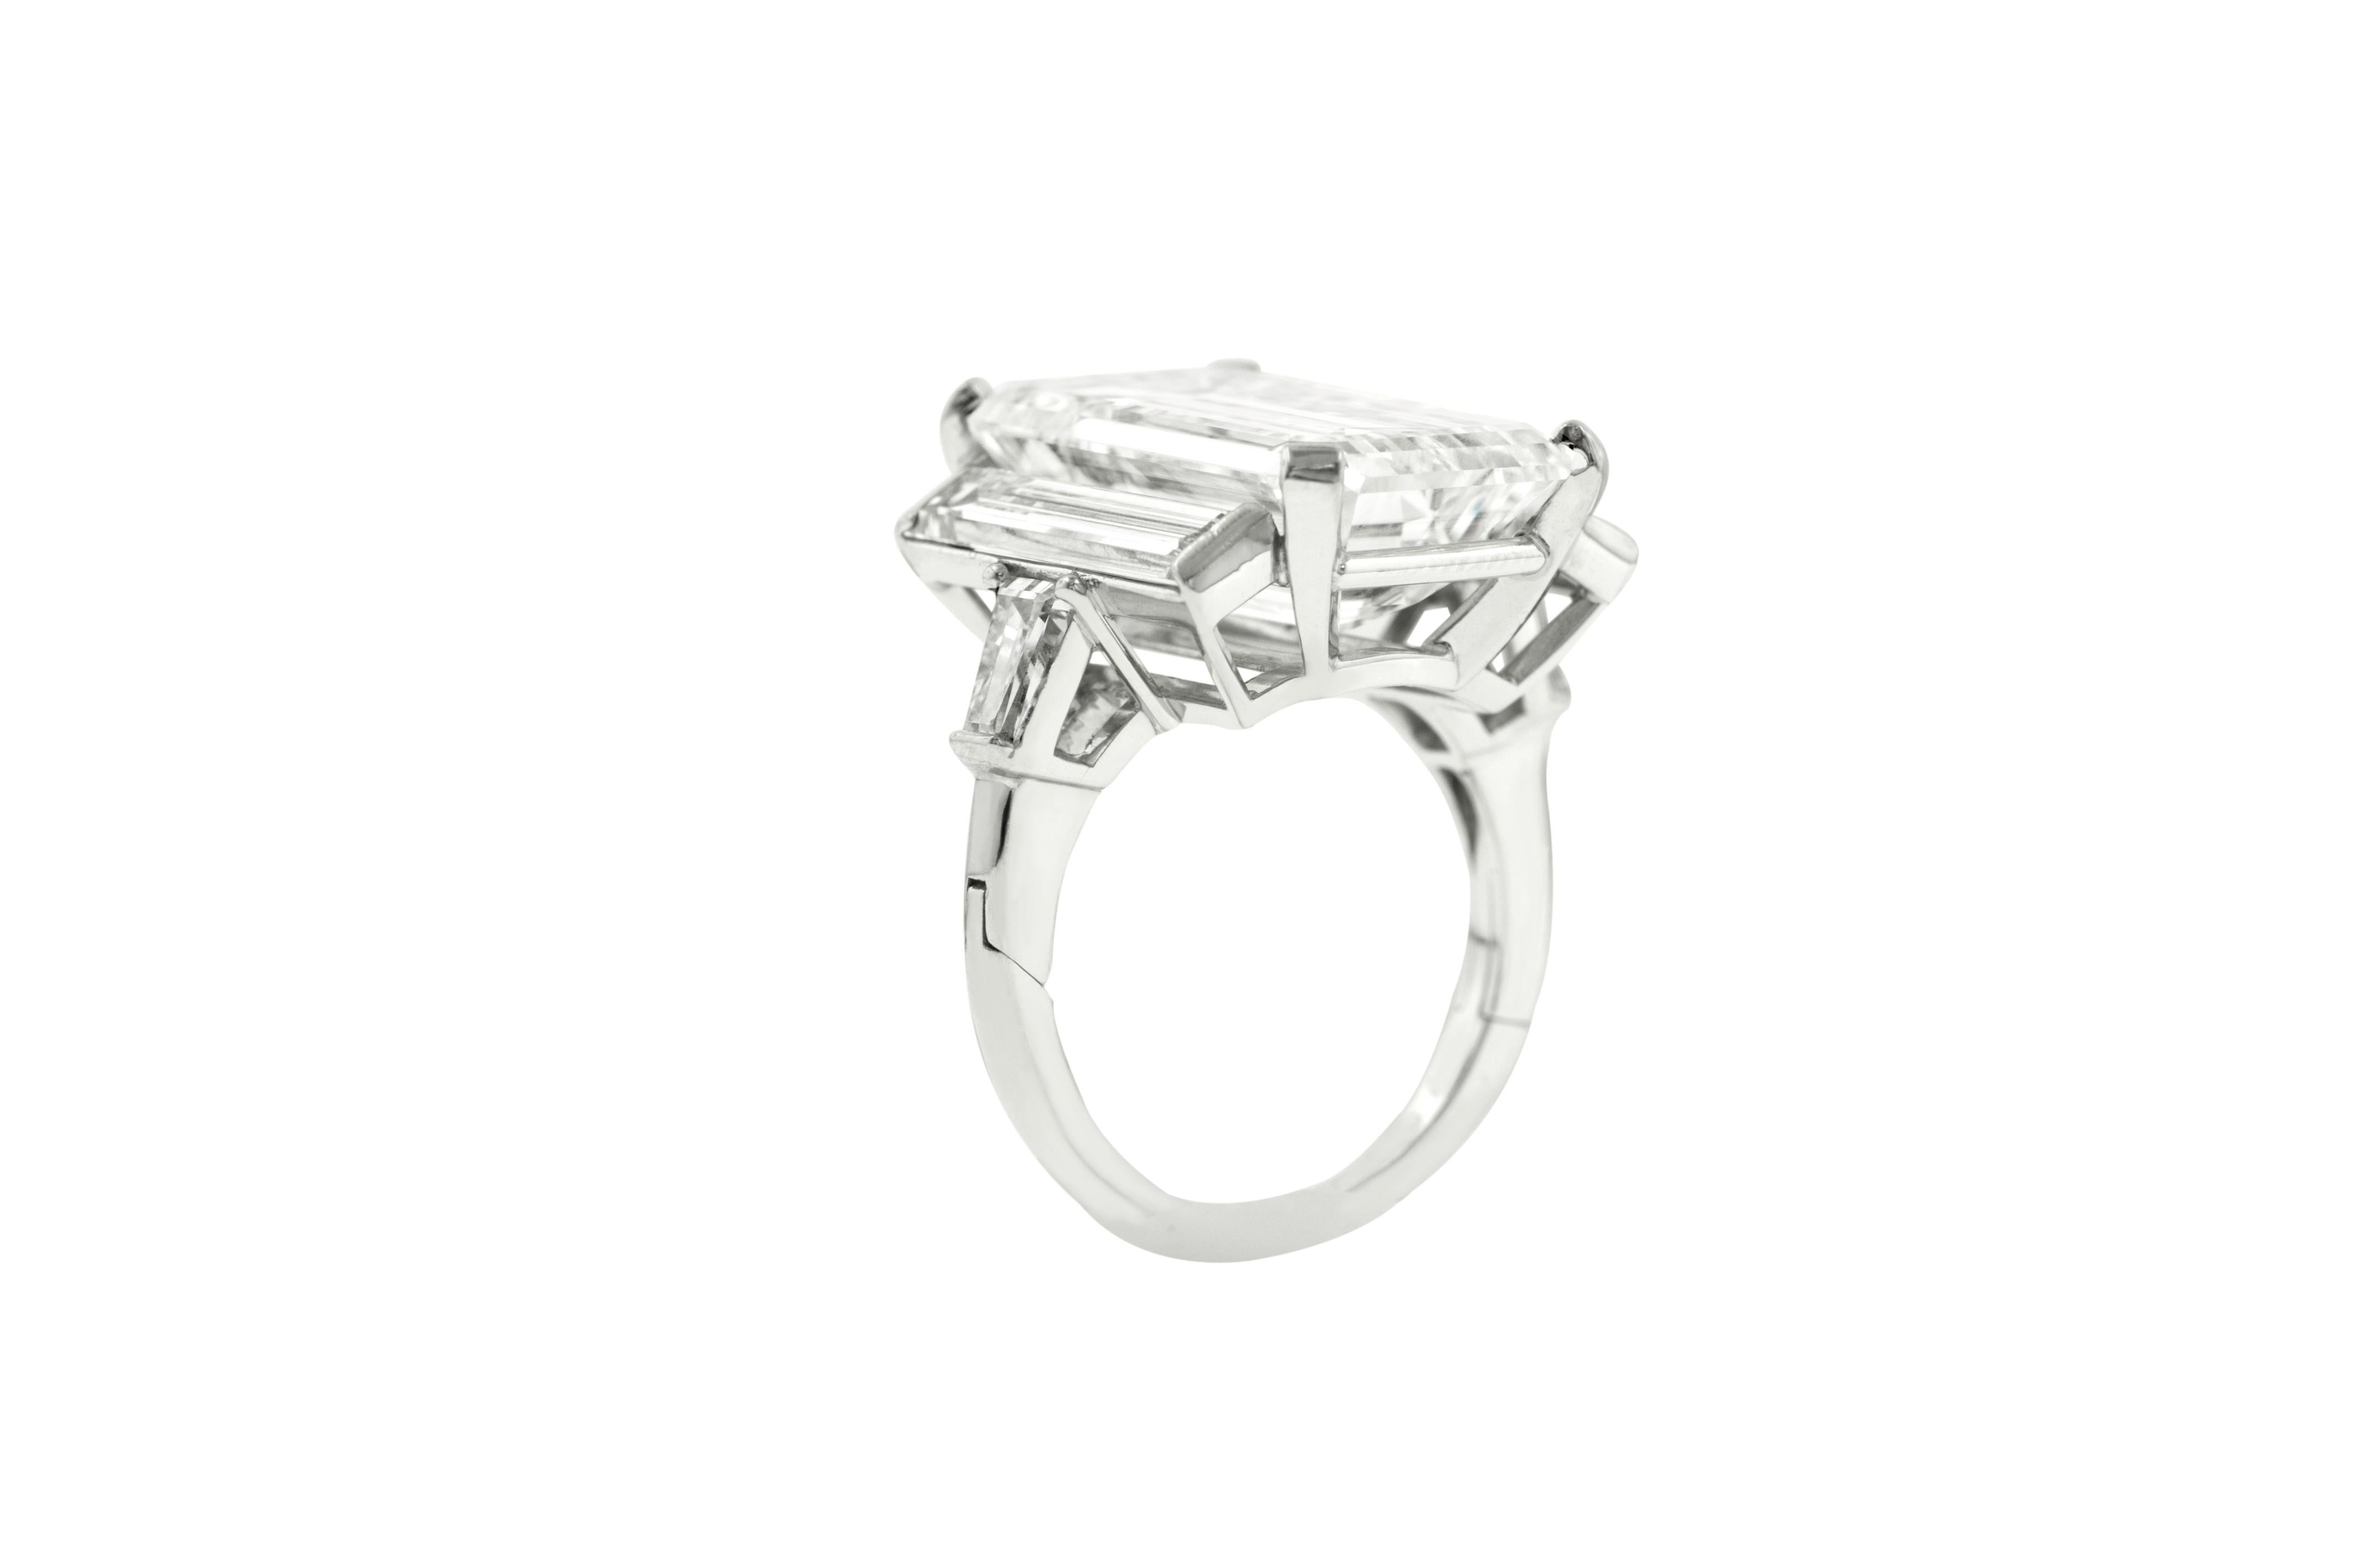 Estate Platinum Emerald cut three stone diamond ring. The center stone is  12.85 Carats Emerald Cut, ideal shape, J in color VS2 in Clarity certified by EGL, set with two long baguette diamonds totaling 2.50 Carats of diamonds. 
Remarkable Three